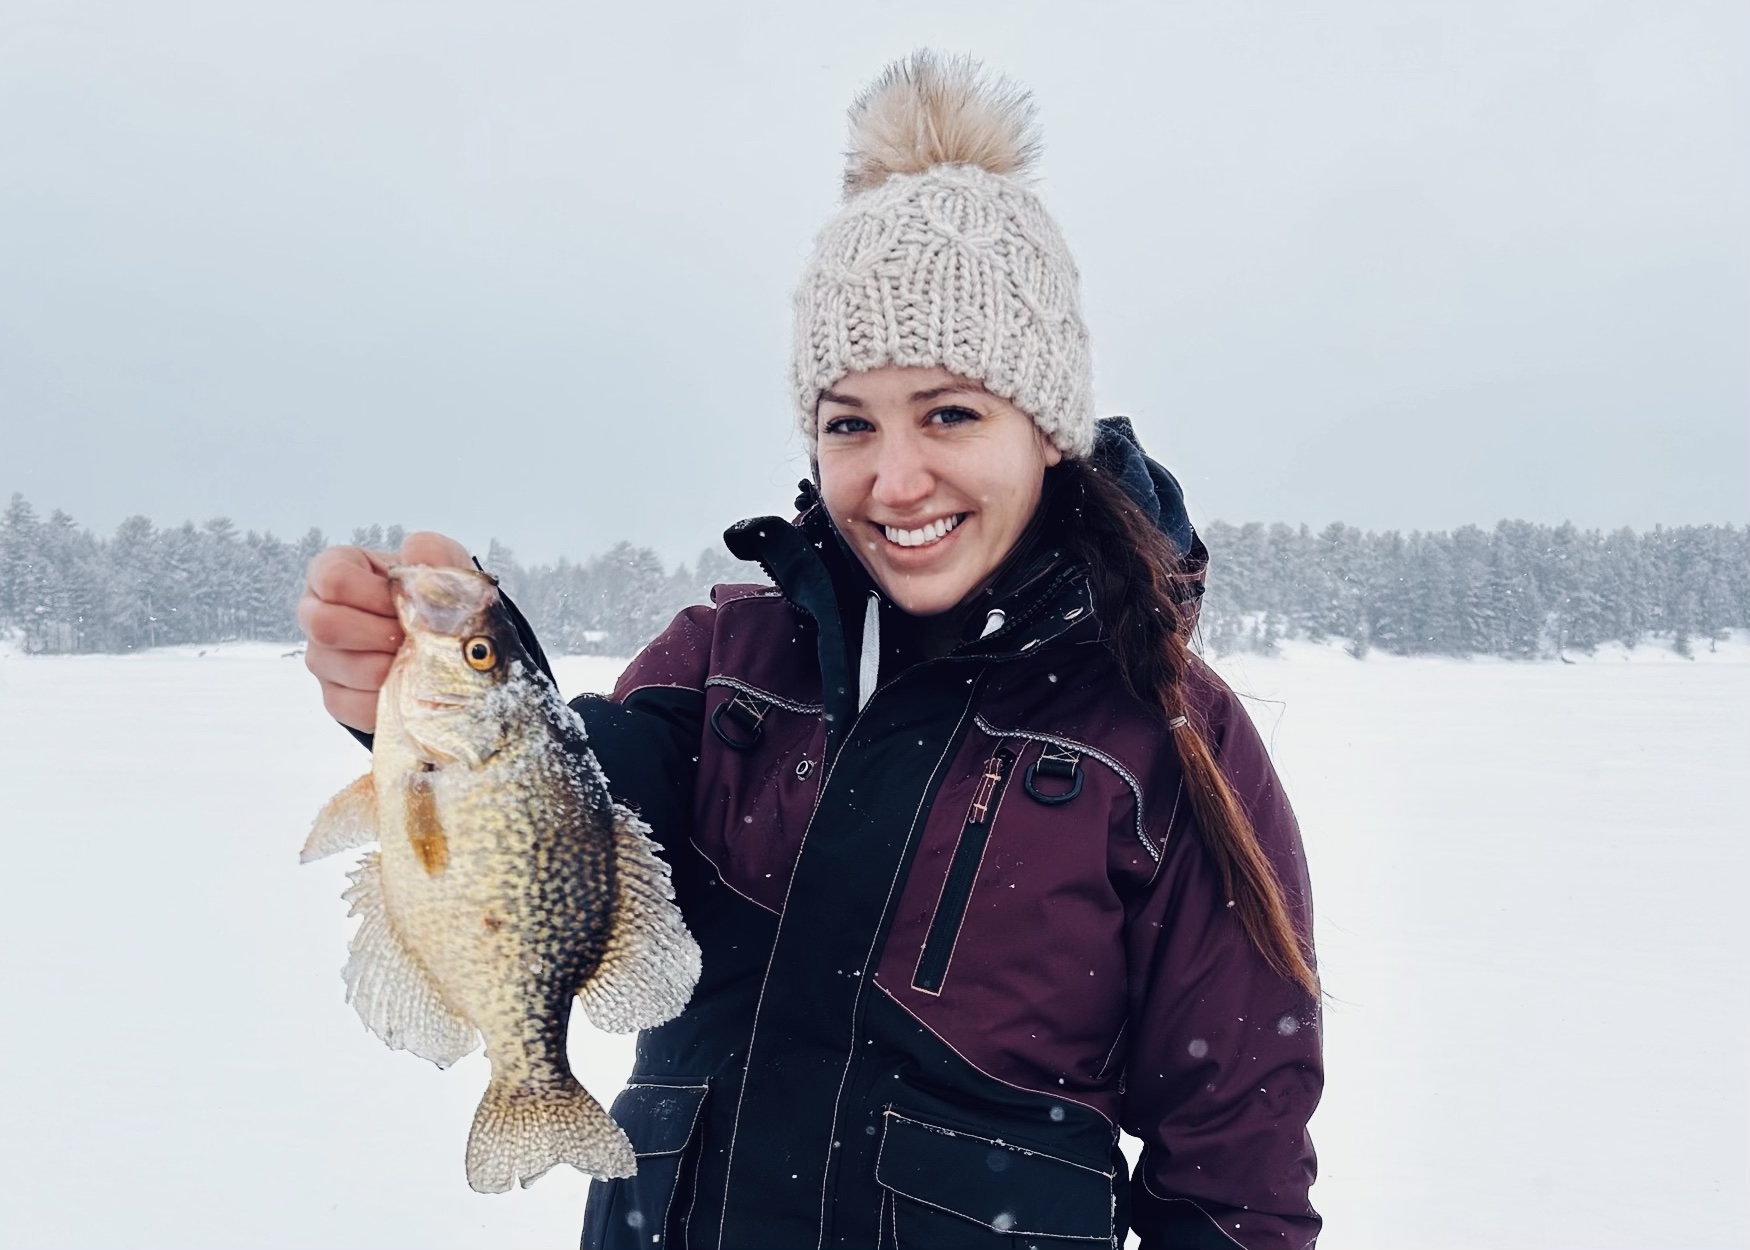 Rach with a sweet crappie